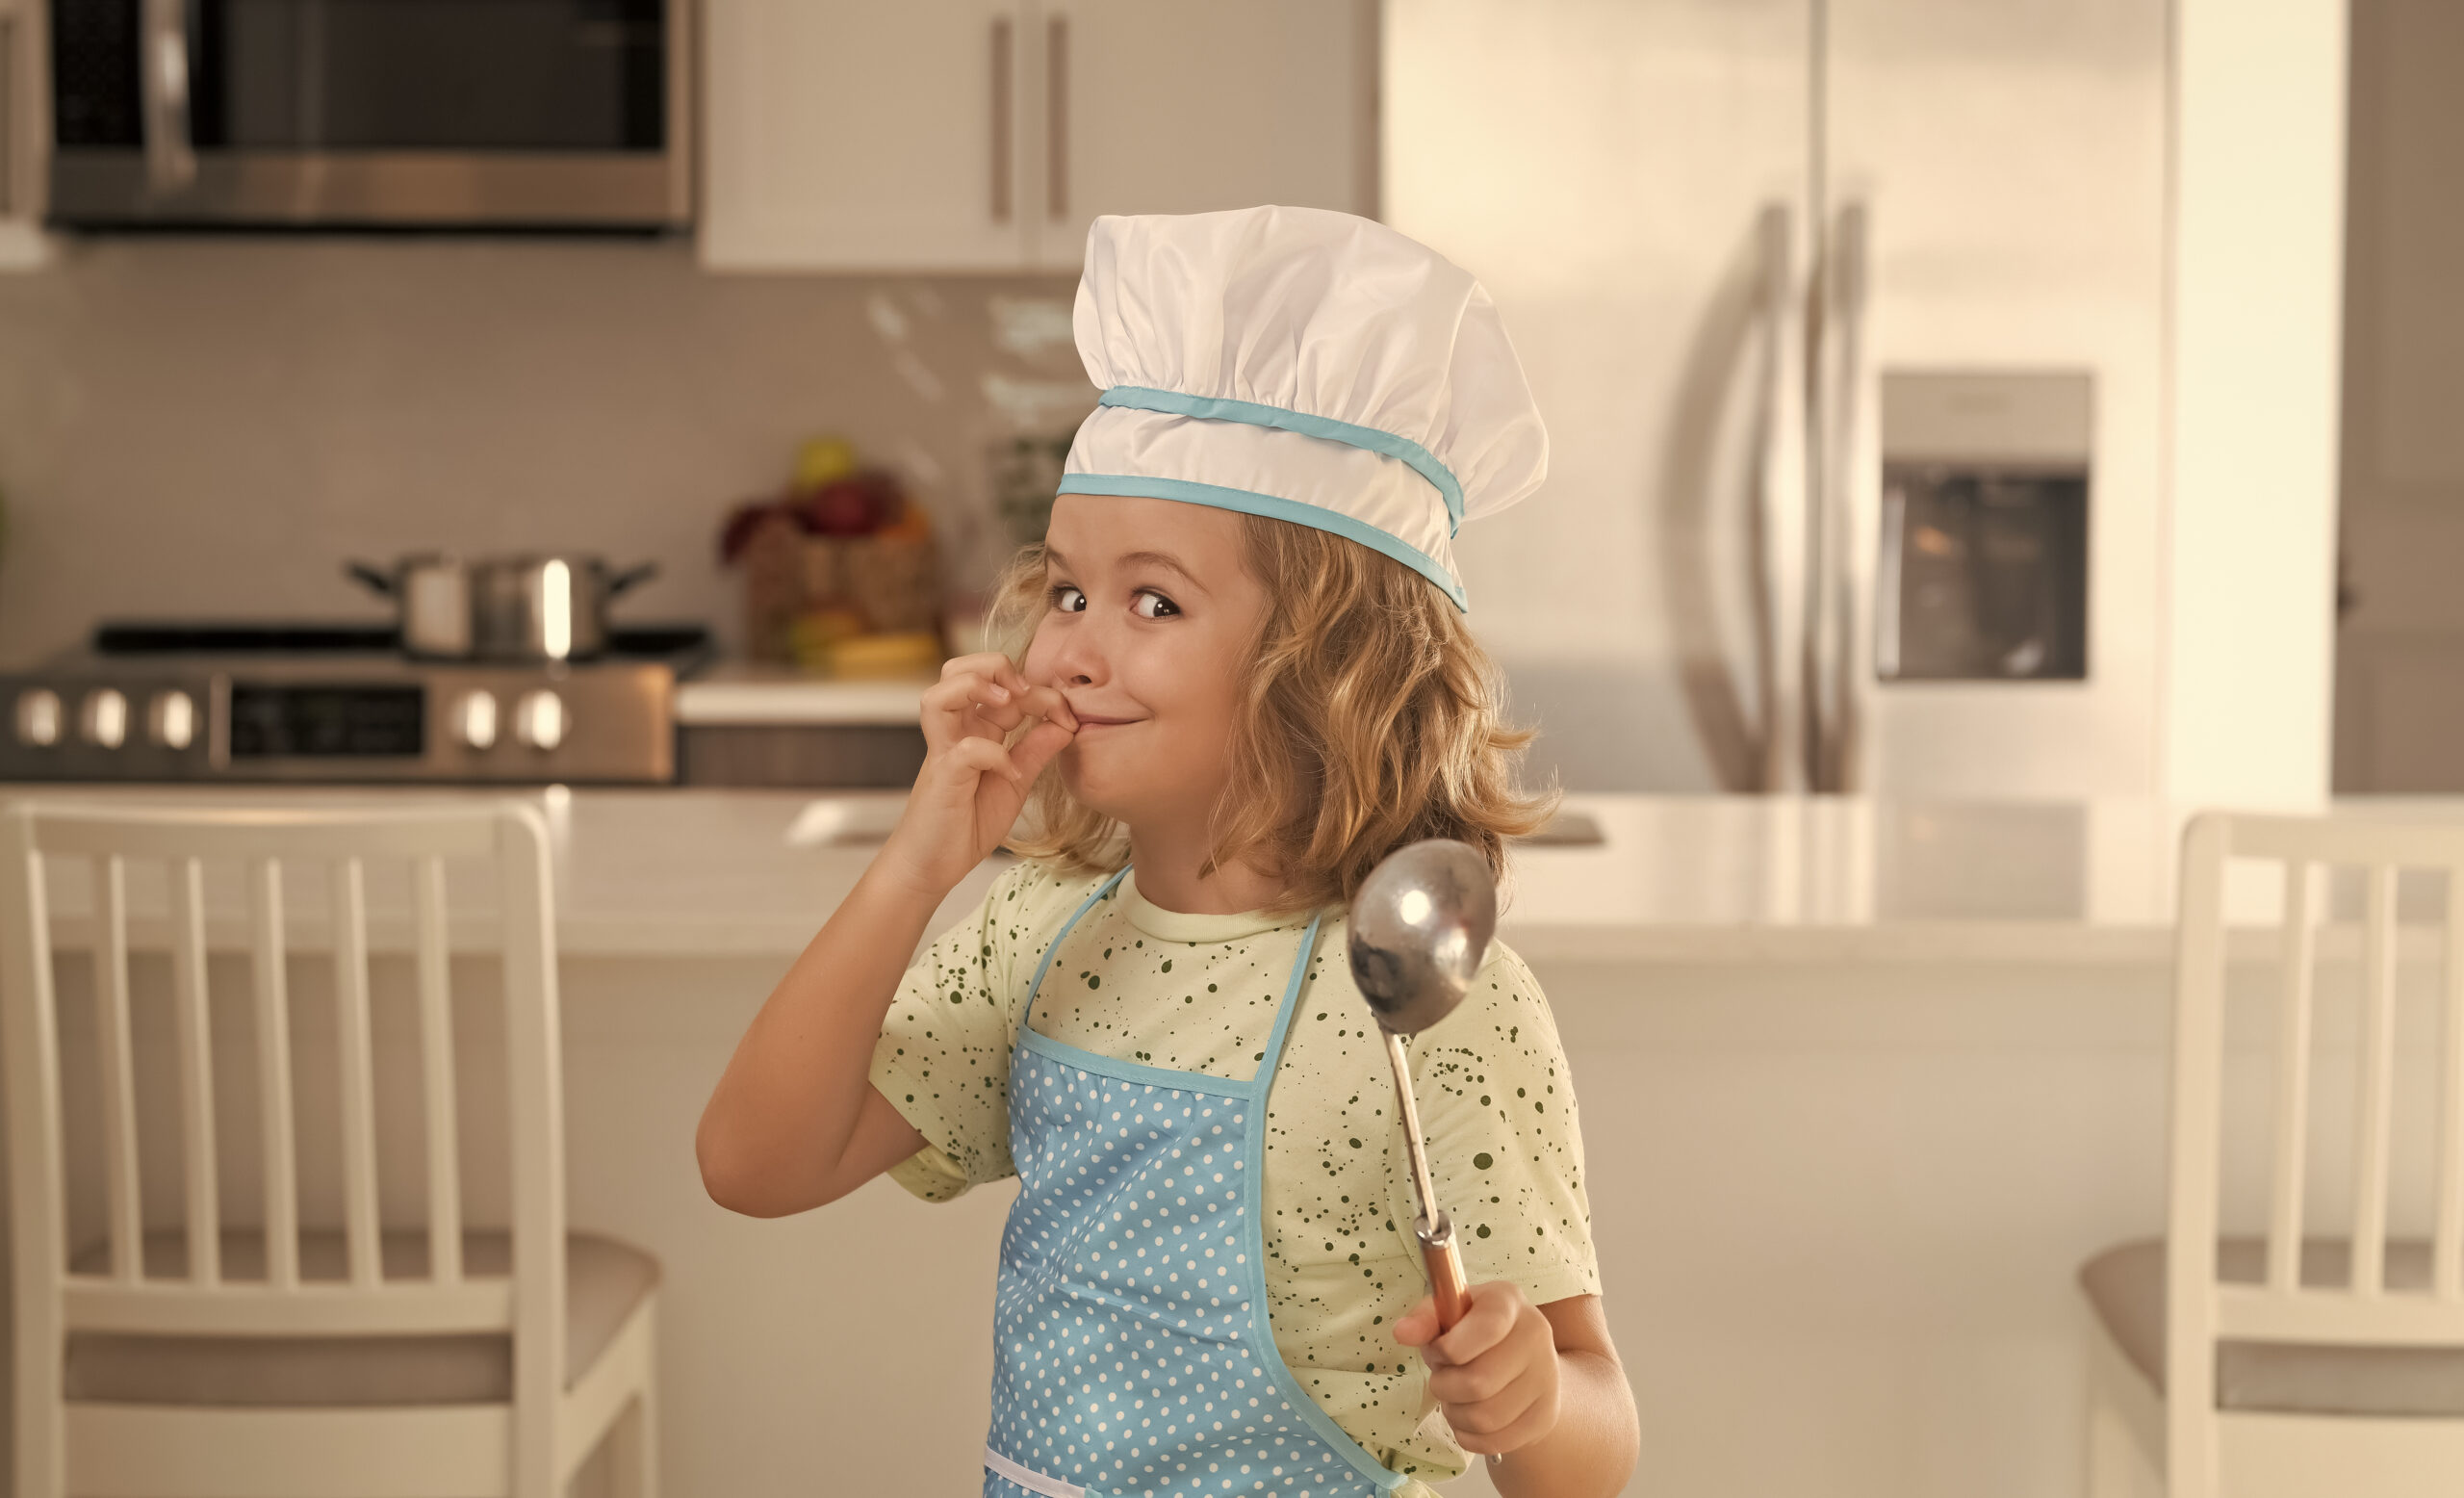 Kid chef cook wearing cooker uniform and chef hat preparing food on kitchen. 